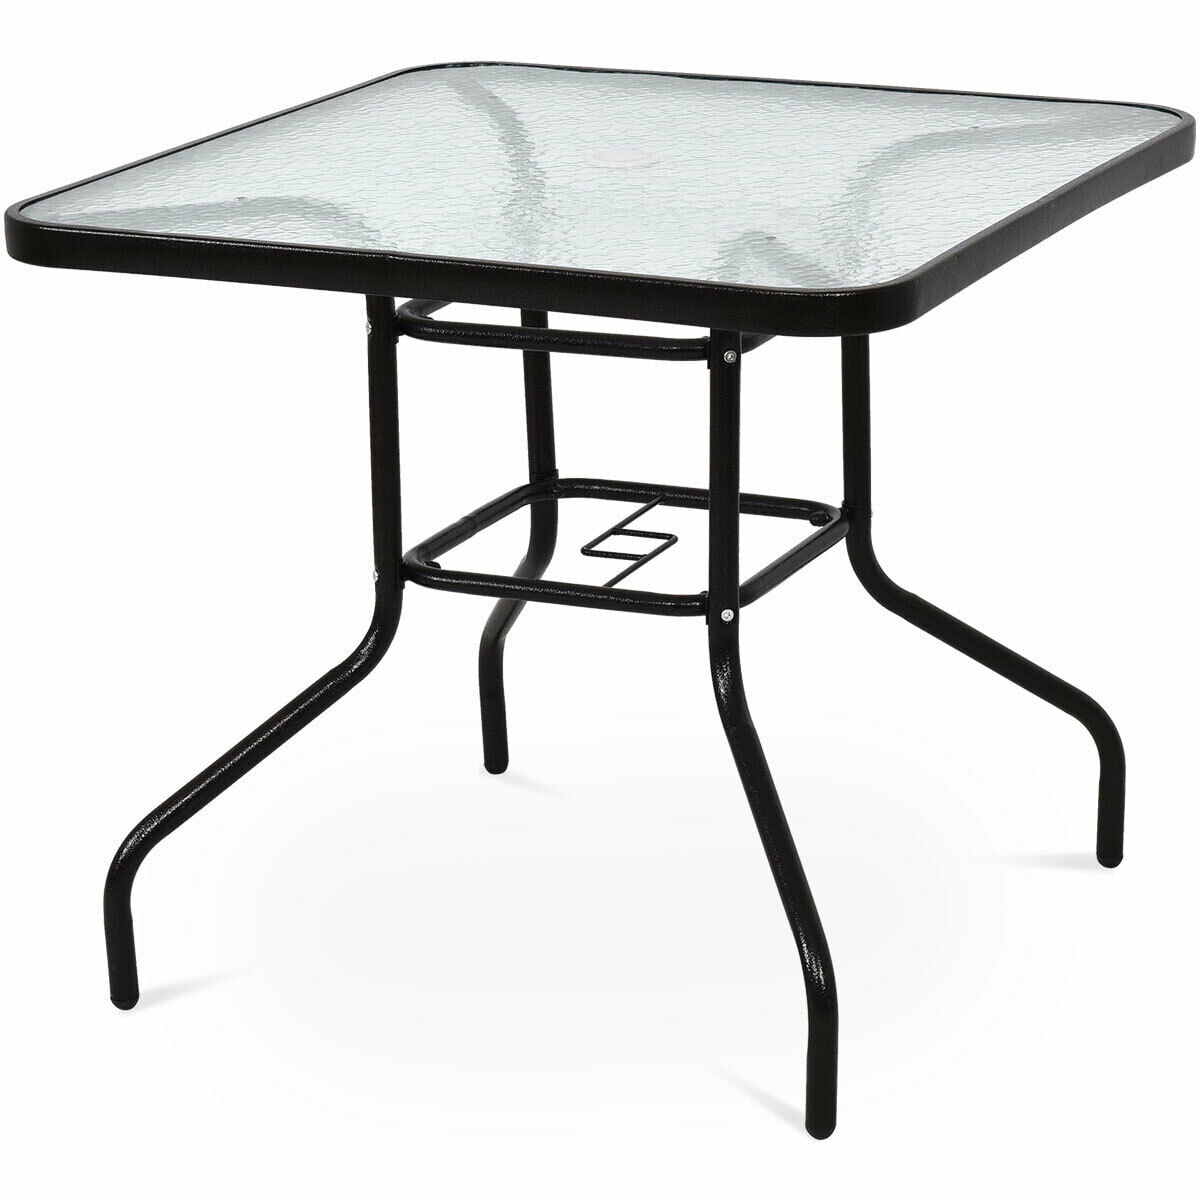 315 Patio Square Glass Top Table Steel Frame Dining Table Patio Furniture Walmart Canada